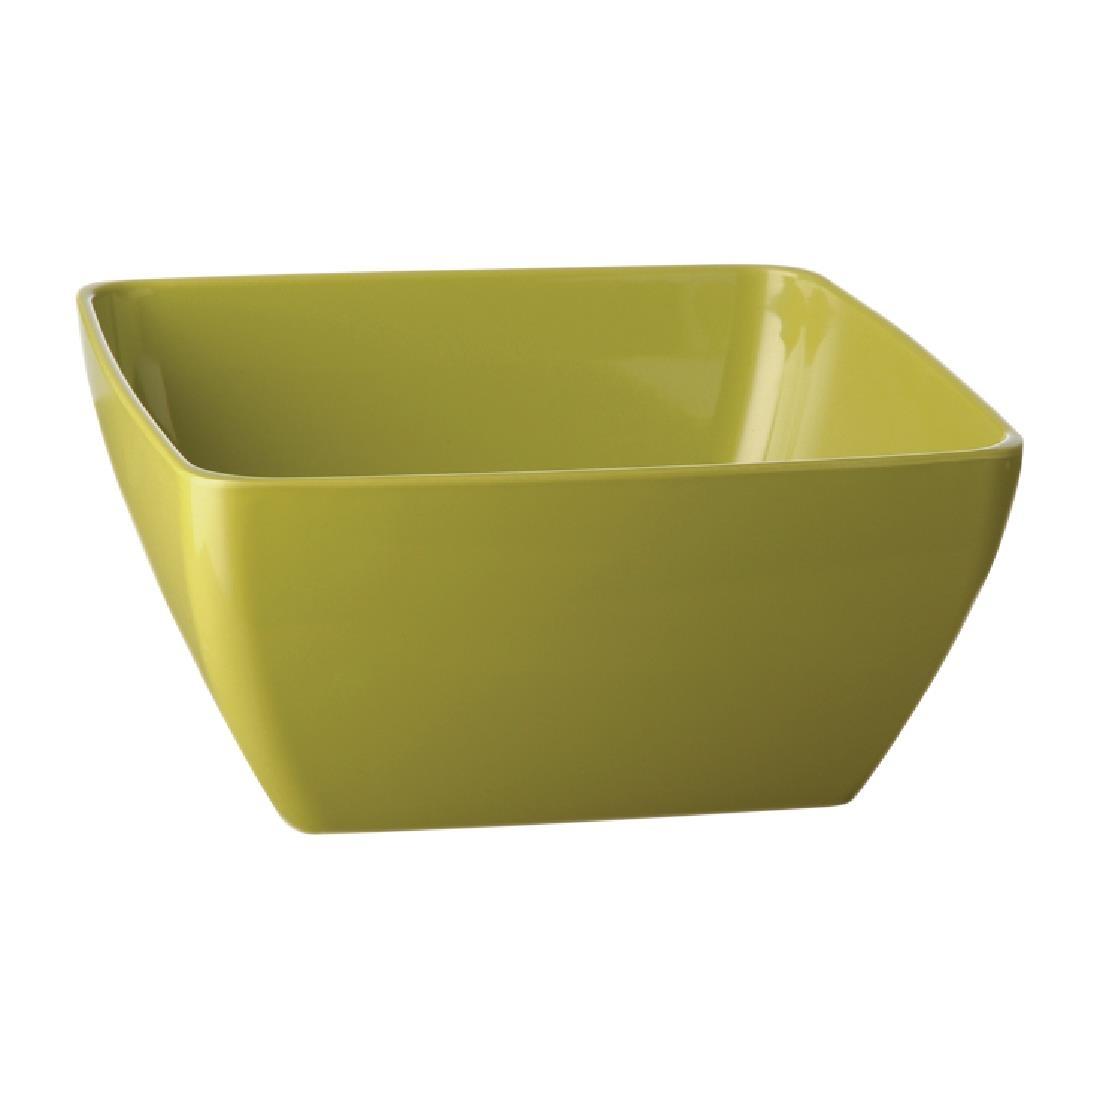 APS Pure Bowl Green 190mm - Each - DS017 - 1